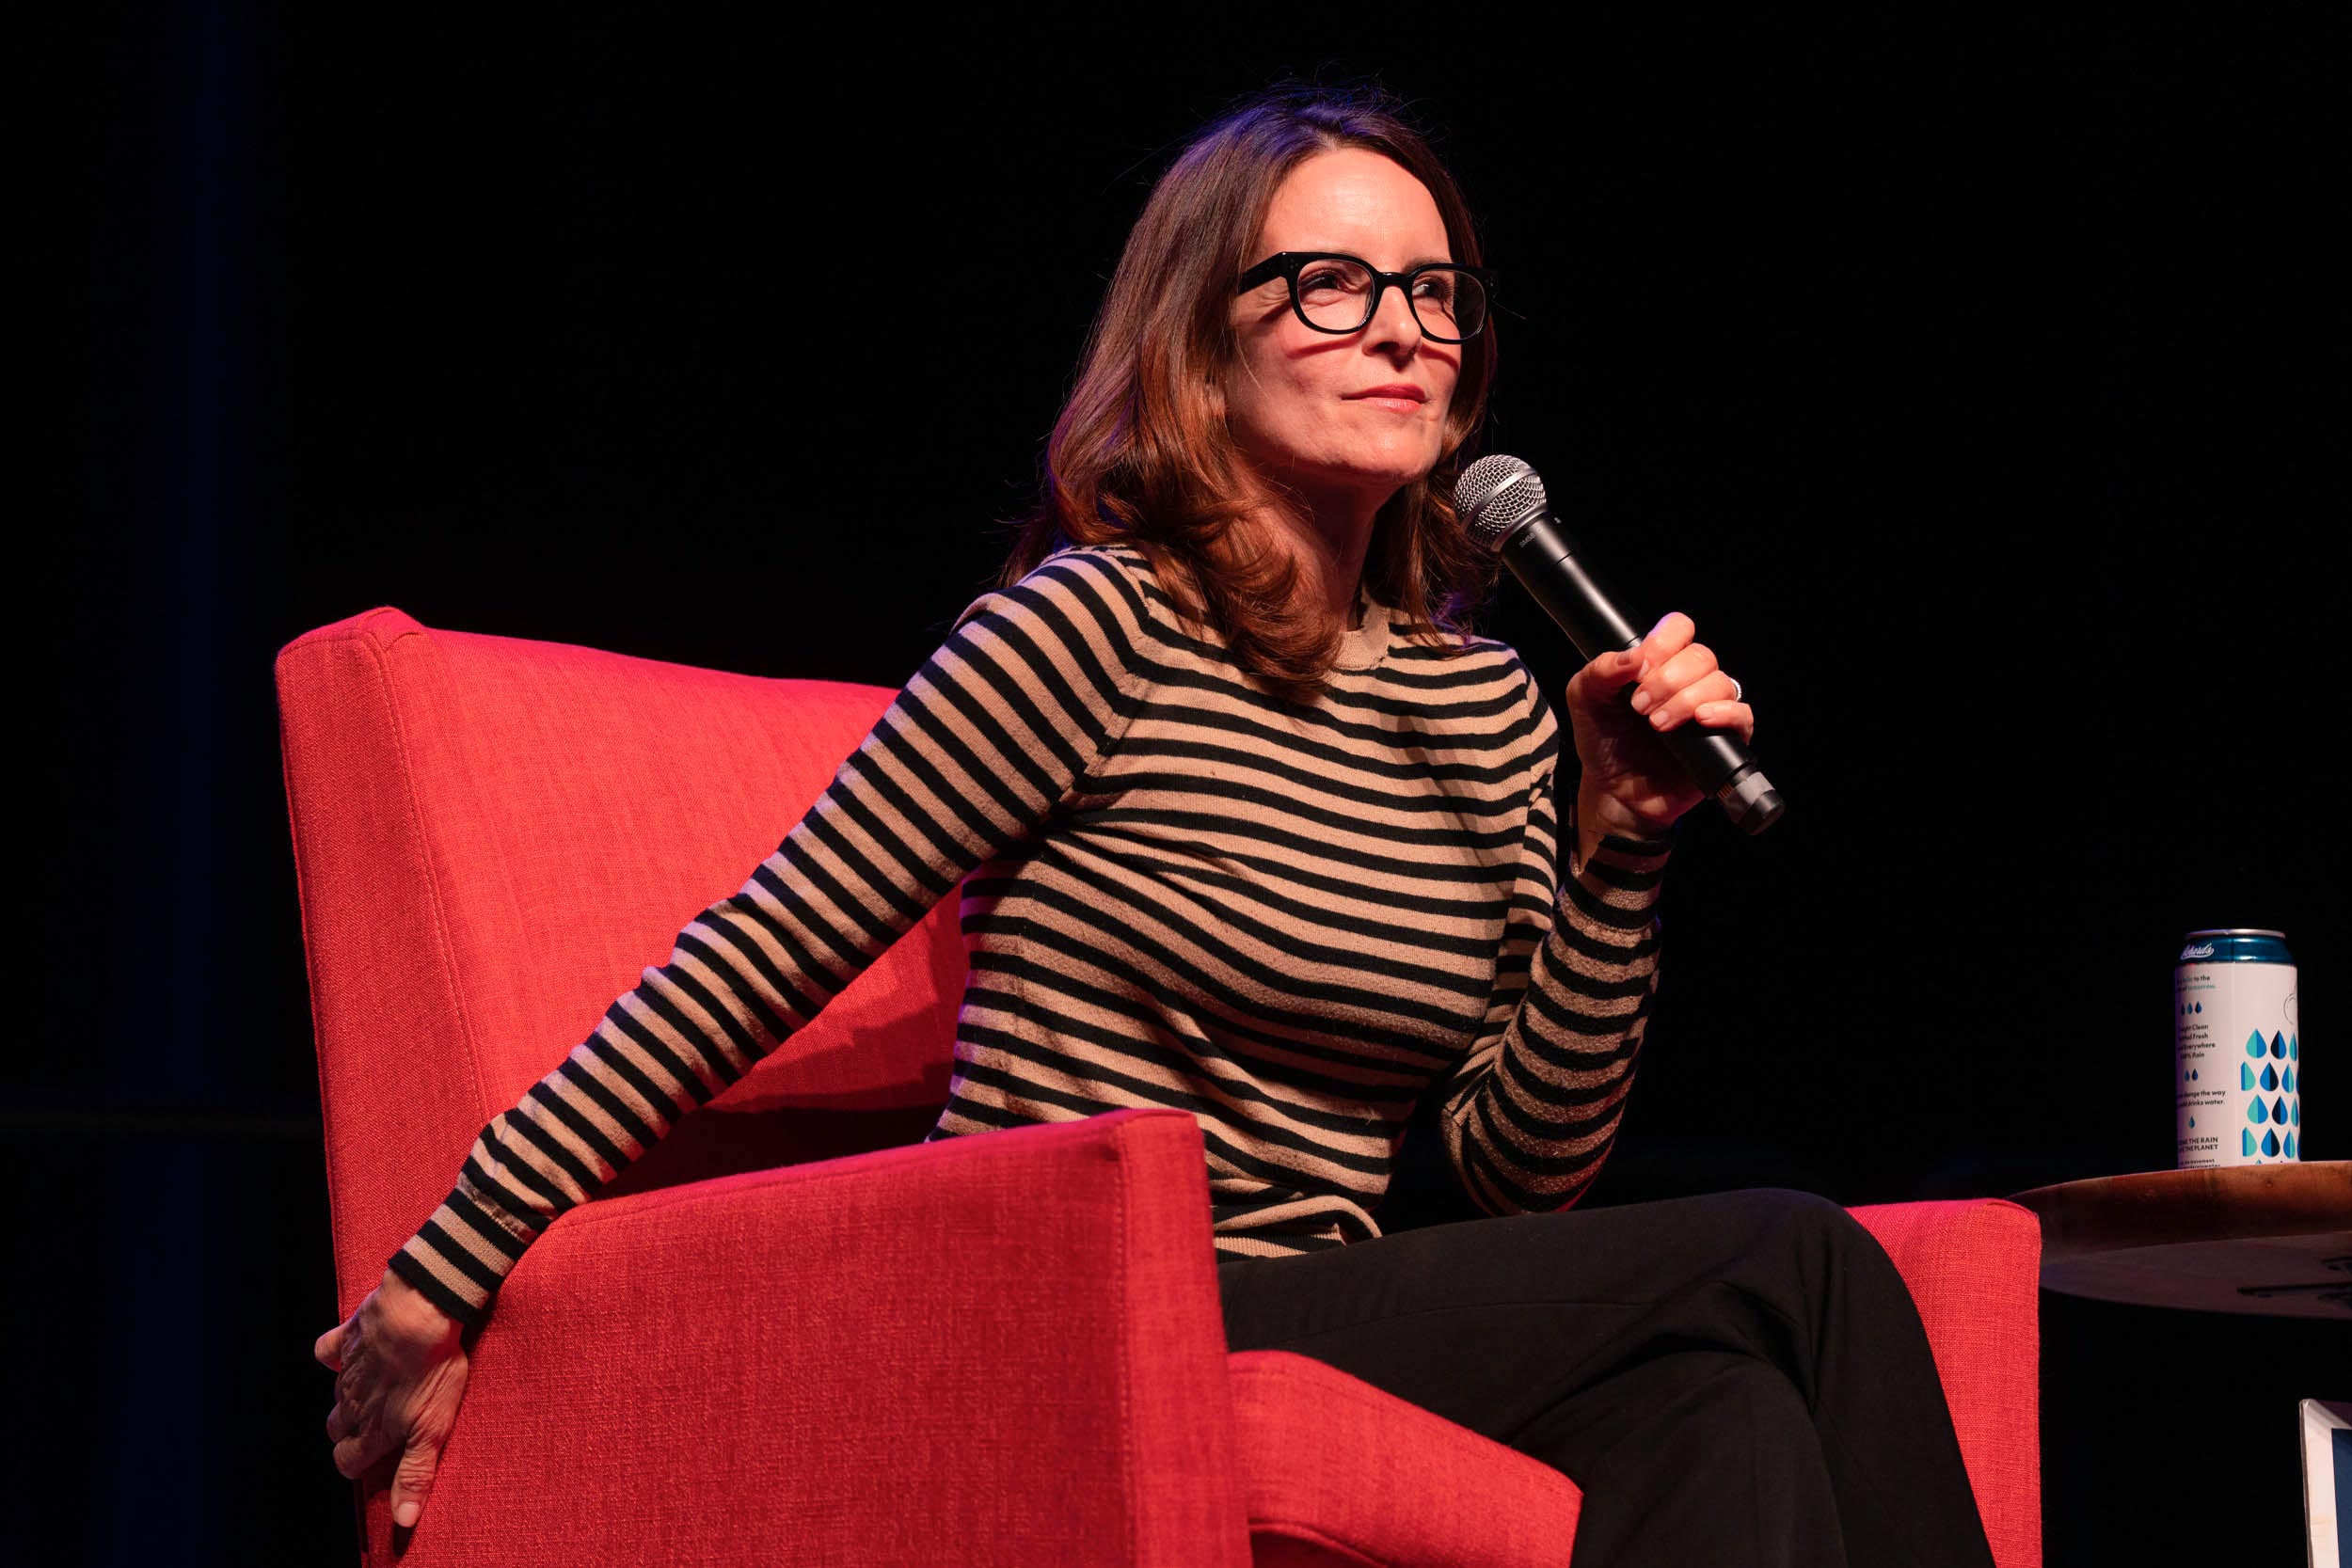 Candid photo of Tina Fey on stage sitting in a red chair holding a microphone